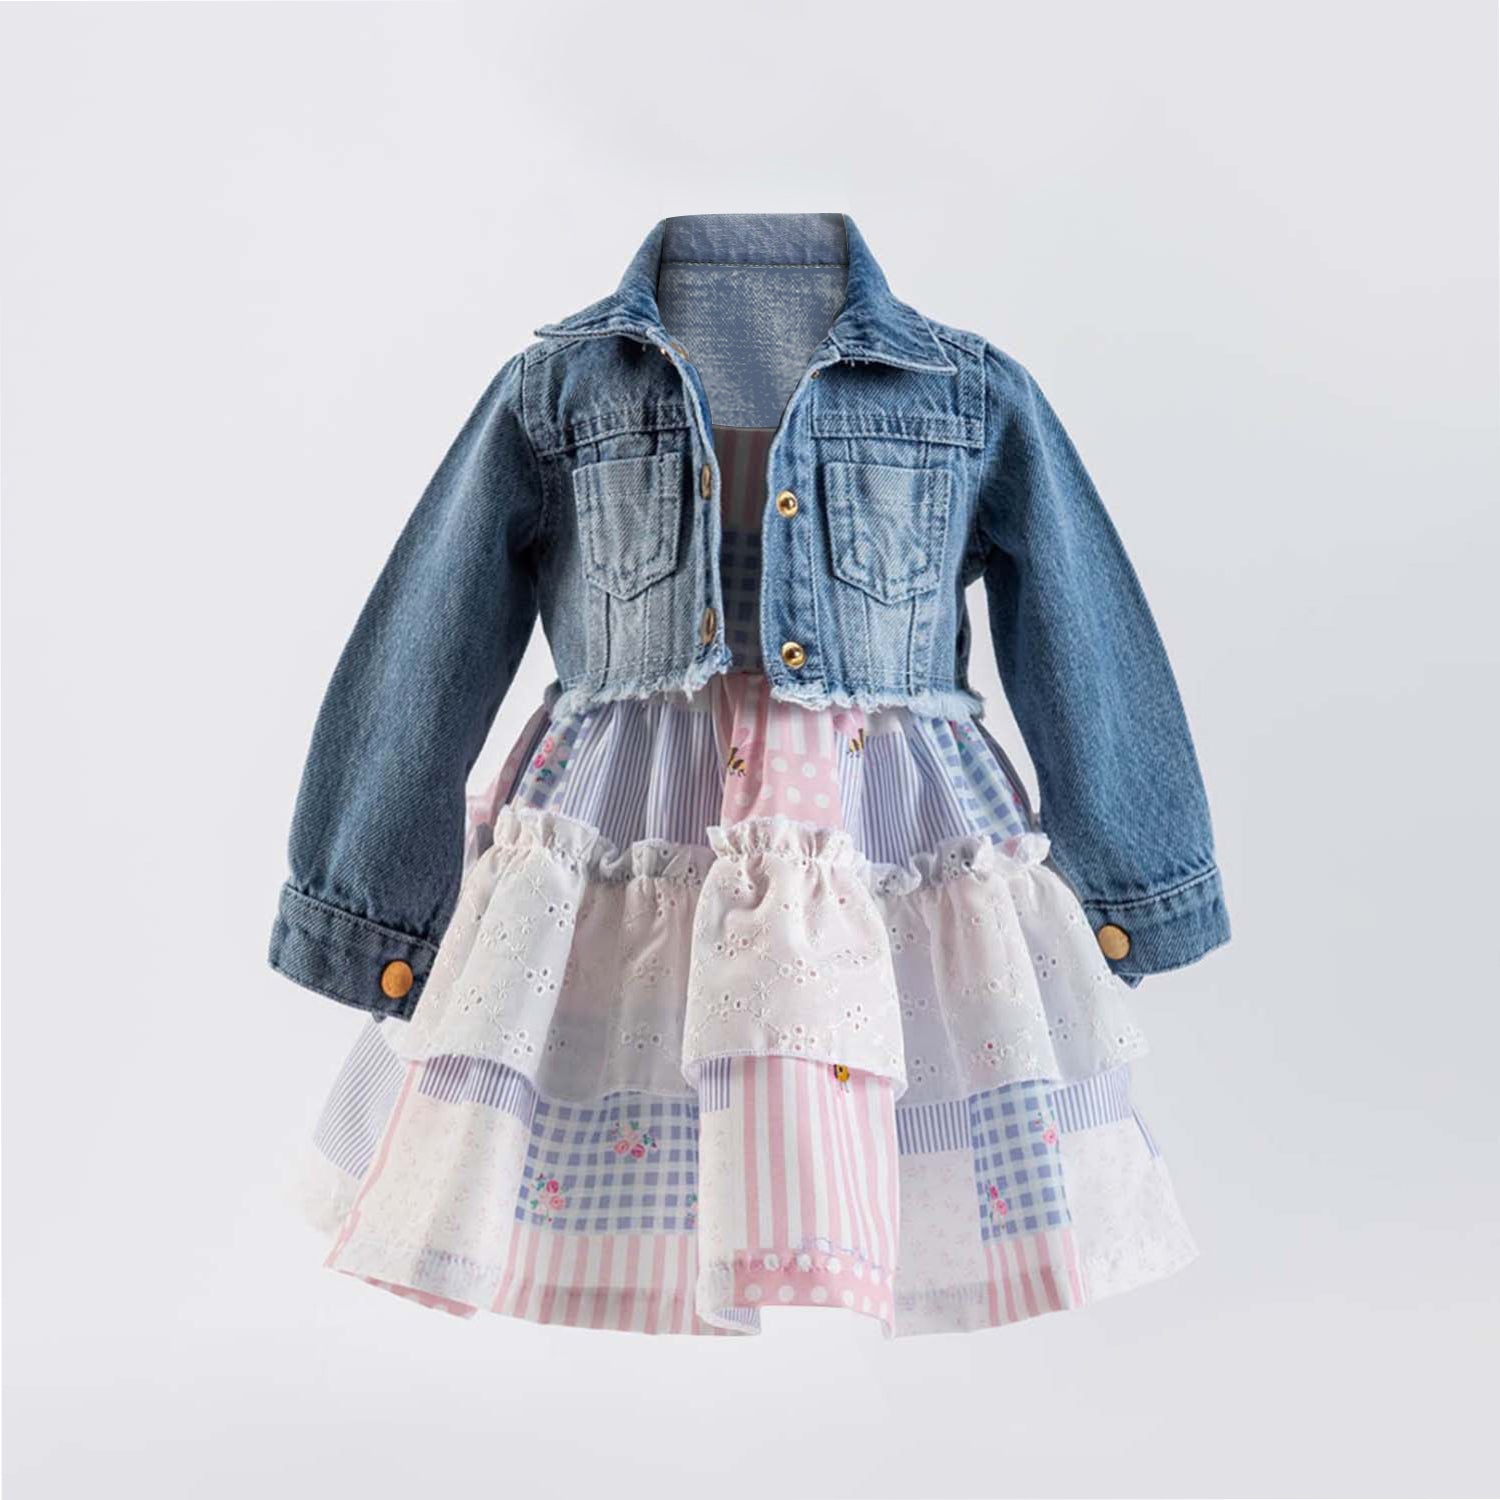 Infant and Toddler Girl's Sundress and Crop Jean Jacket 2-Piece Adorable Outfit